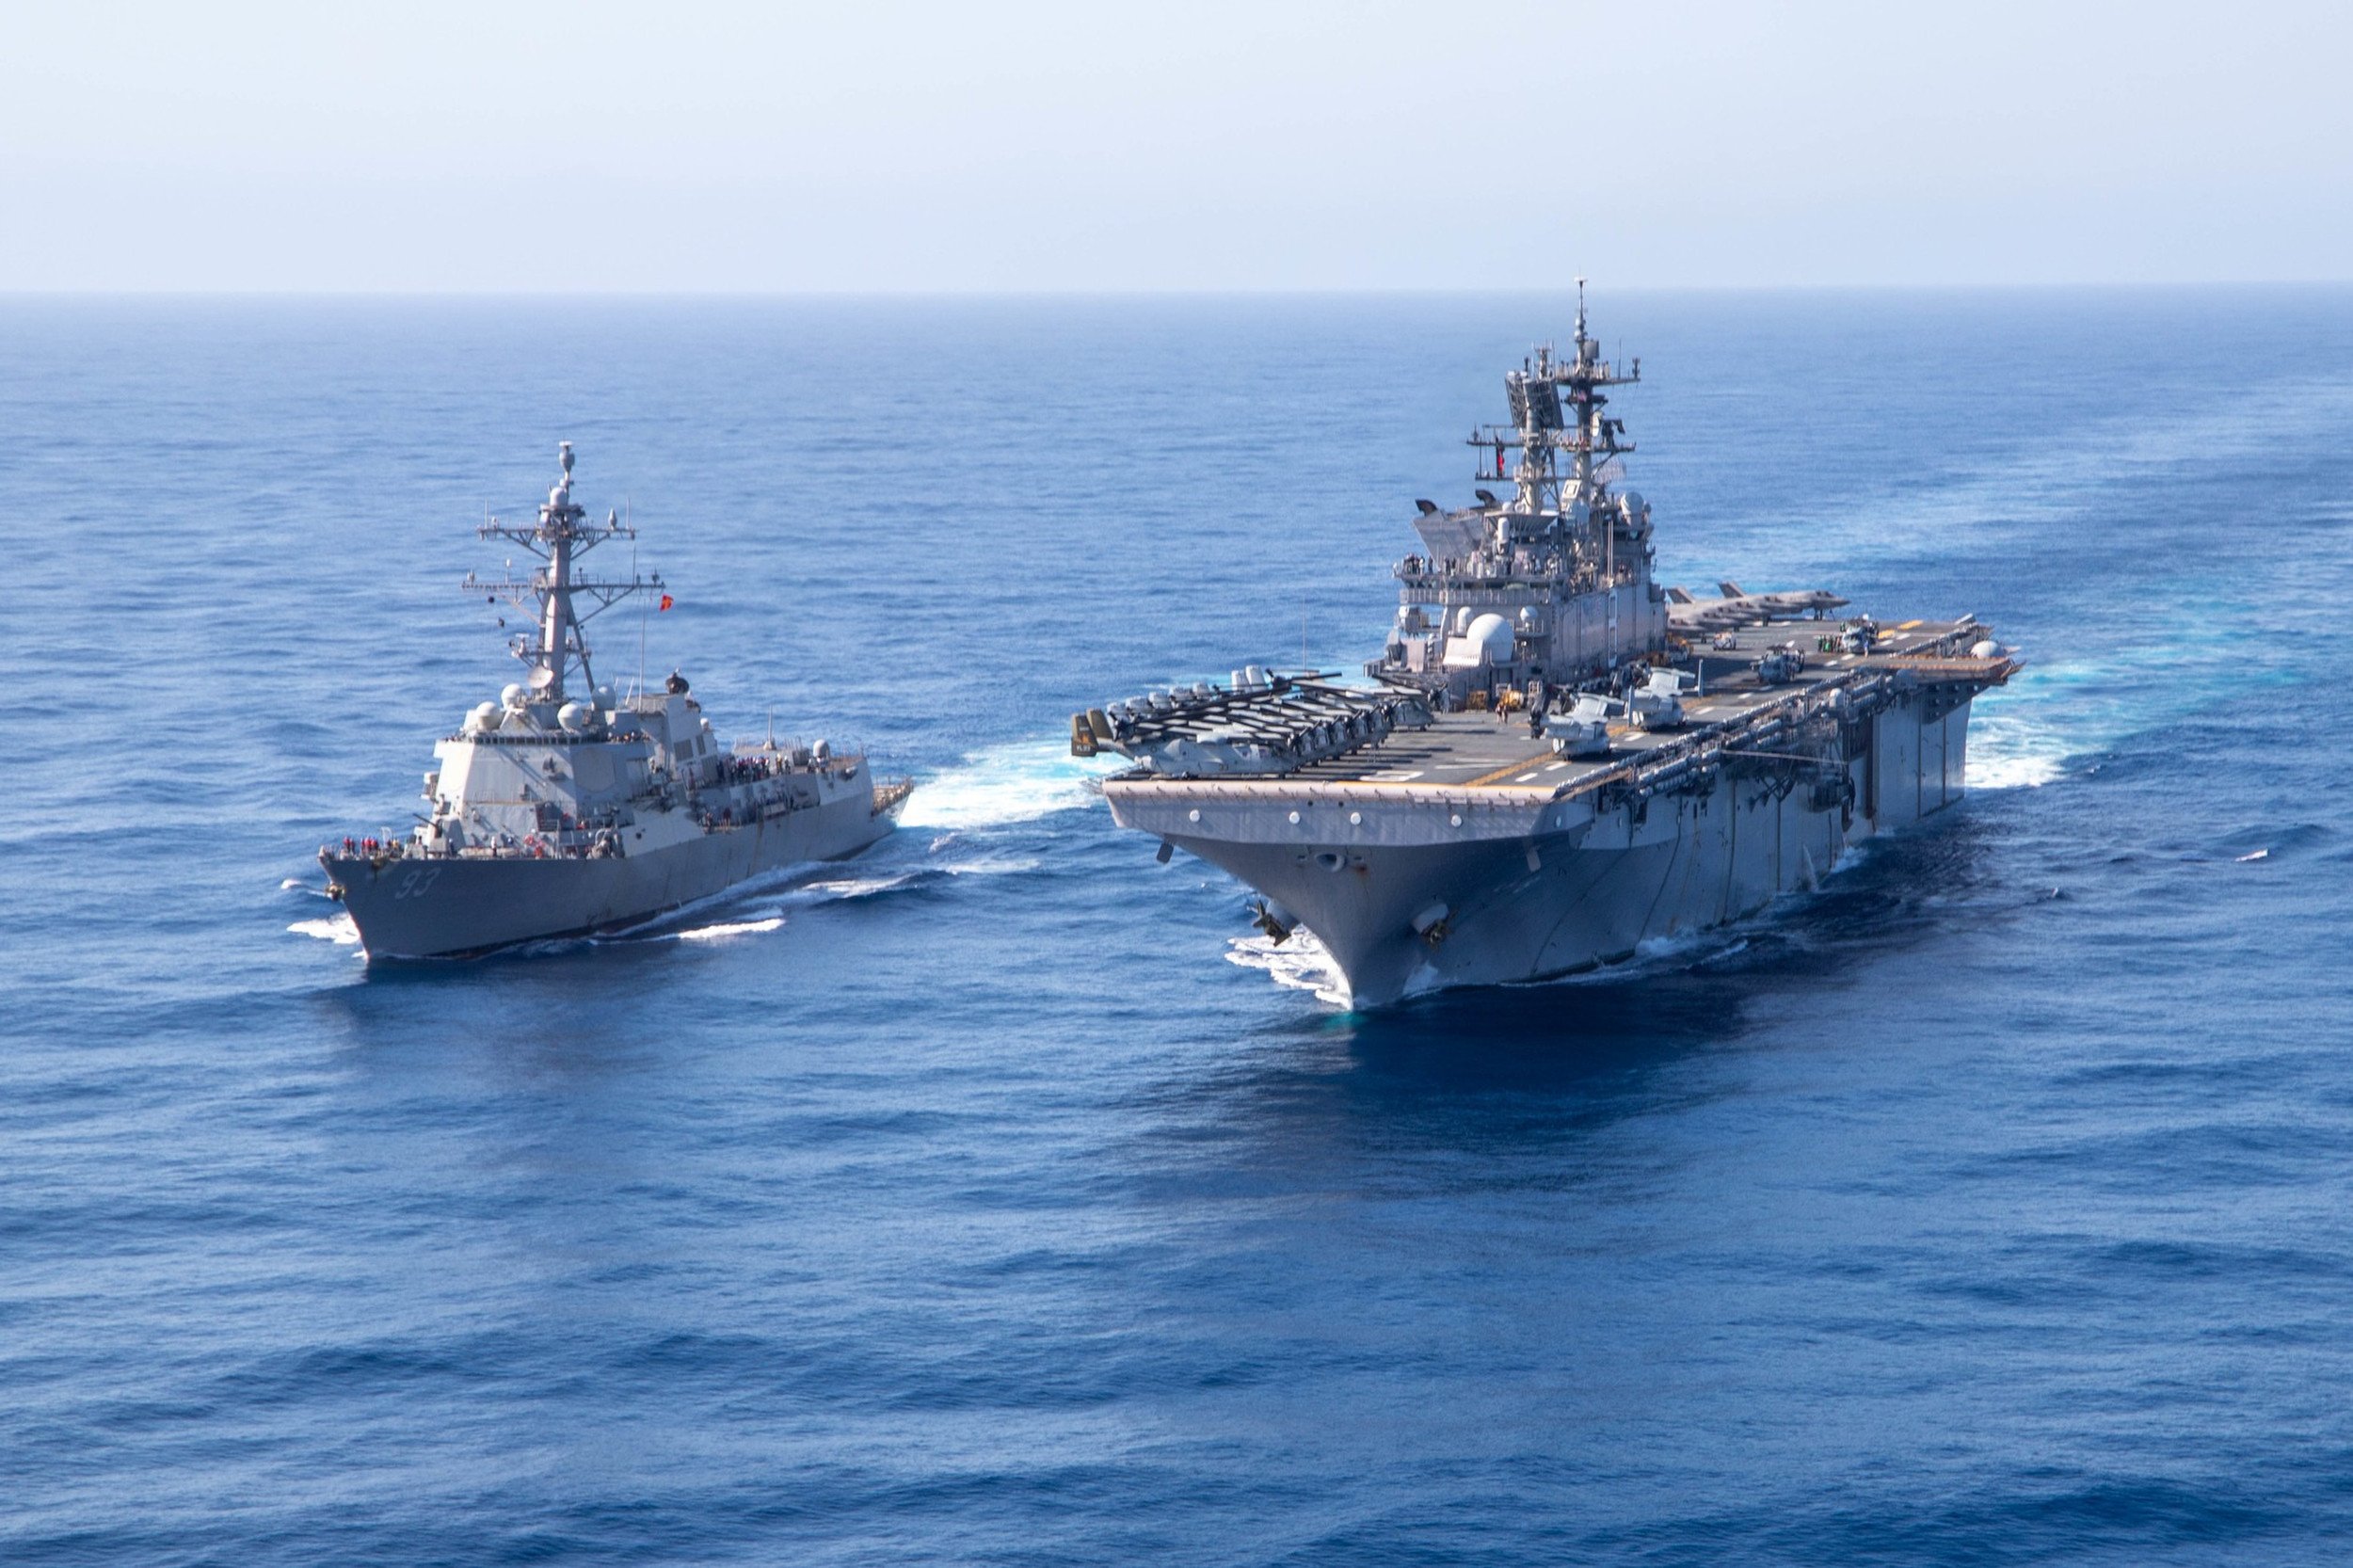 Members of a discussion panel at the Boao Forum have expressed concerns at the increasing US military deployments in the South China Sea. Photo: US Navy